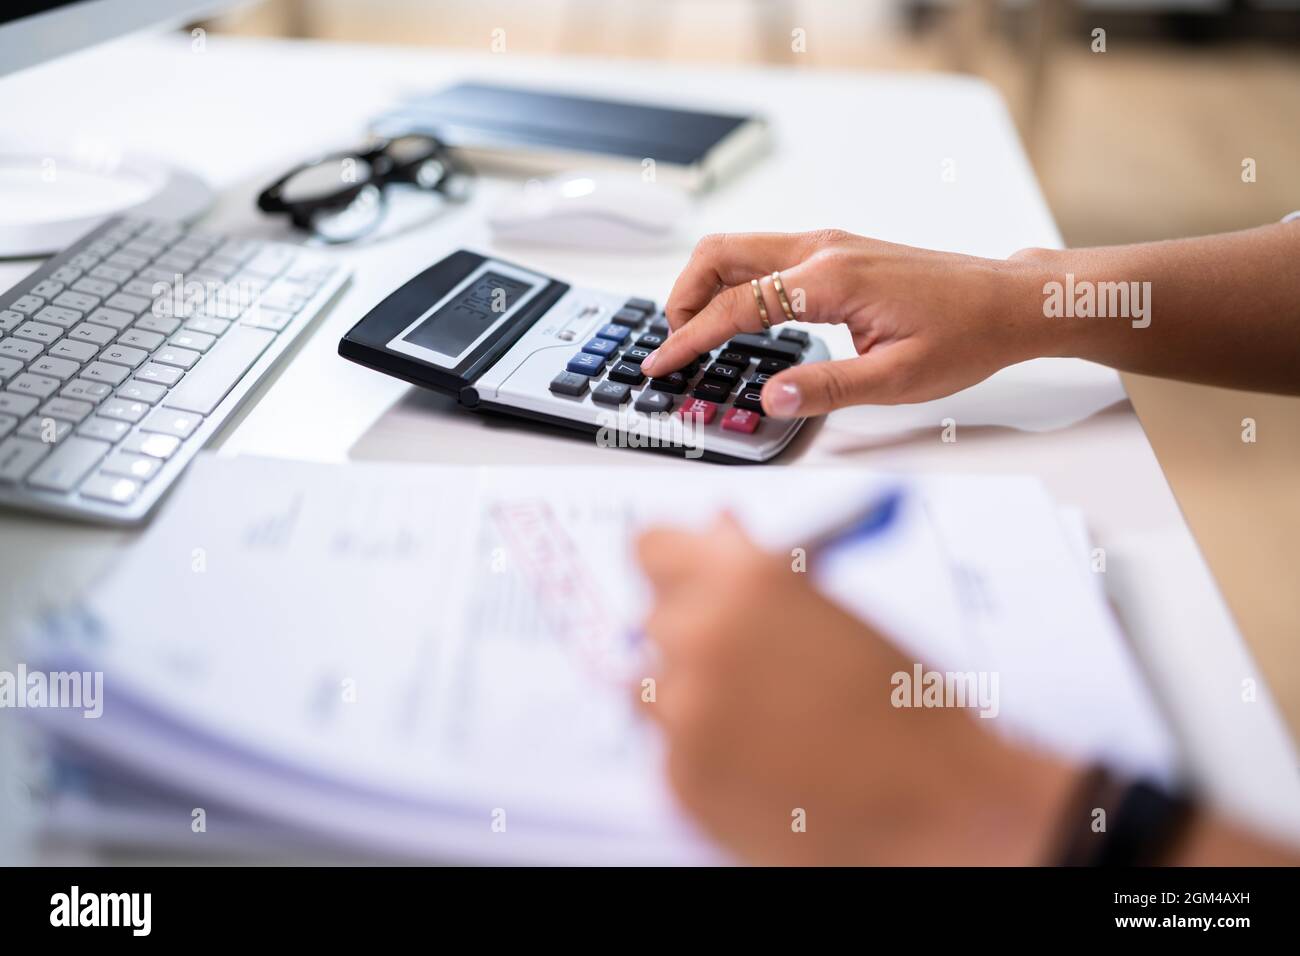 Calculating Company Business Expense Invoice And Budgeting Stock Photo